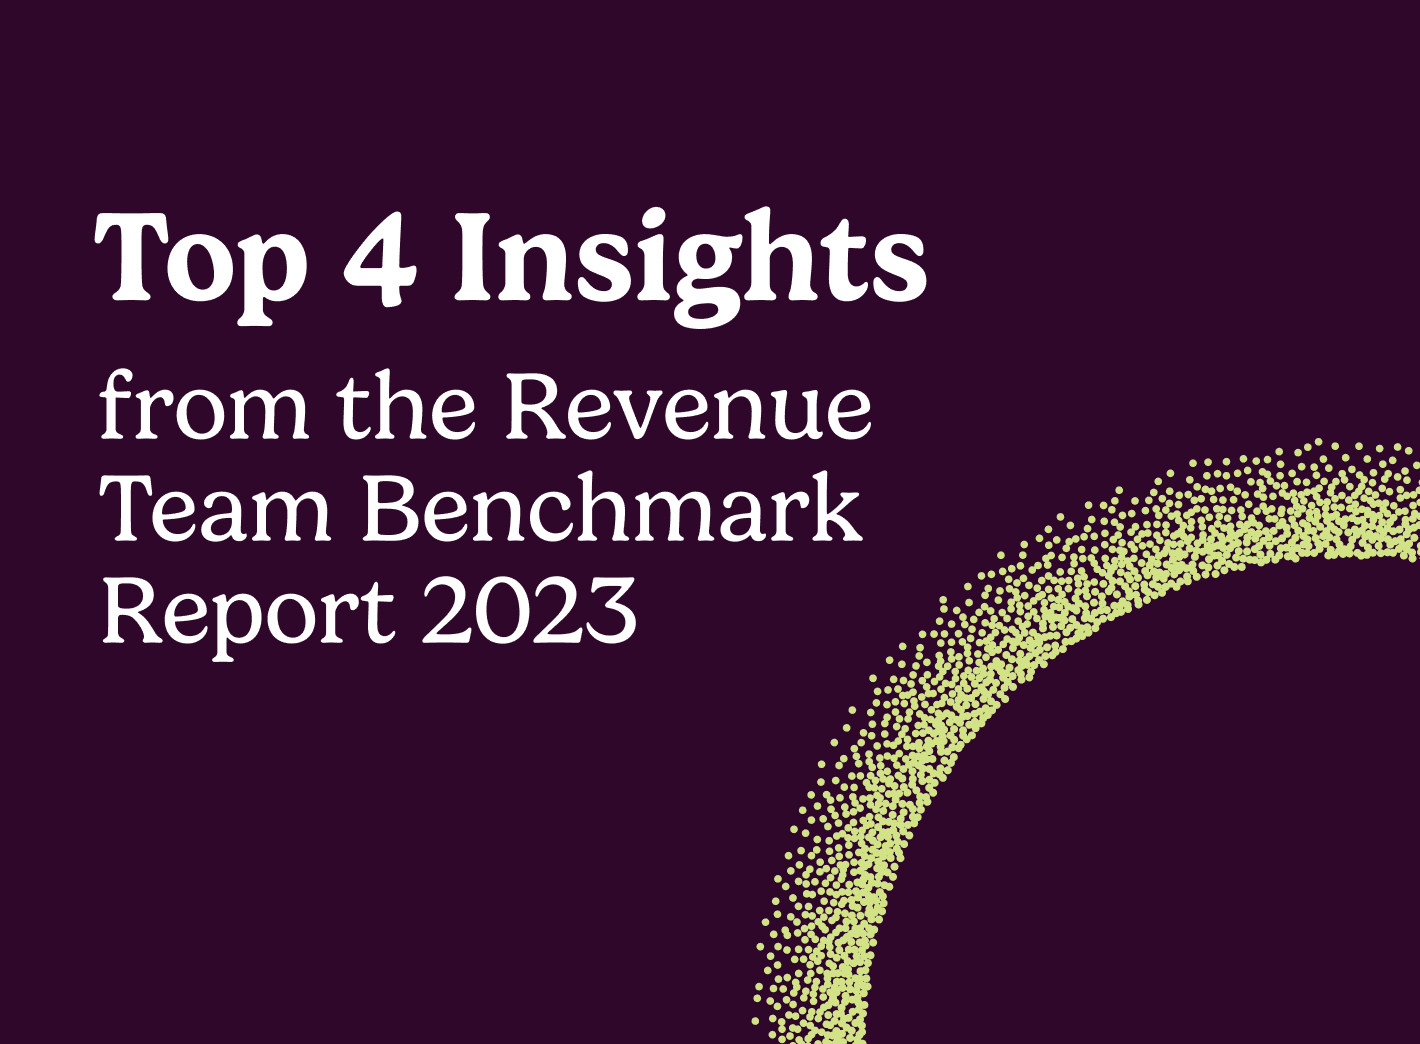 "Top 4 Insights from the Revenue Team Benchmark Report 2023"